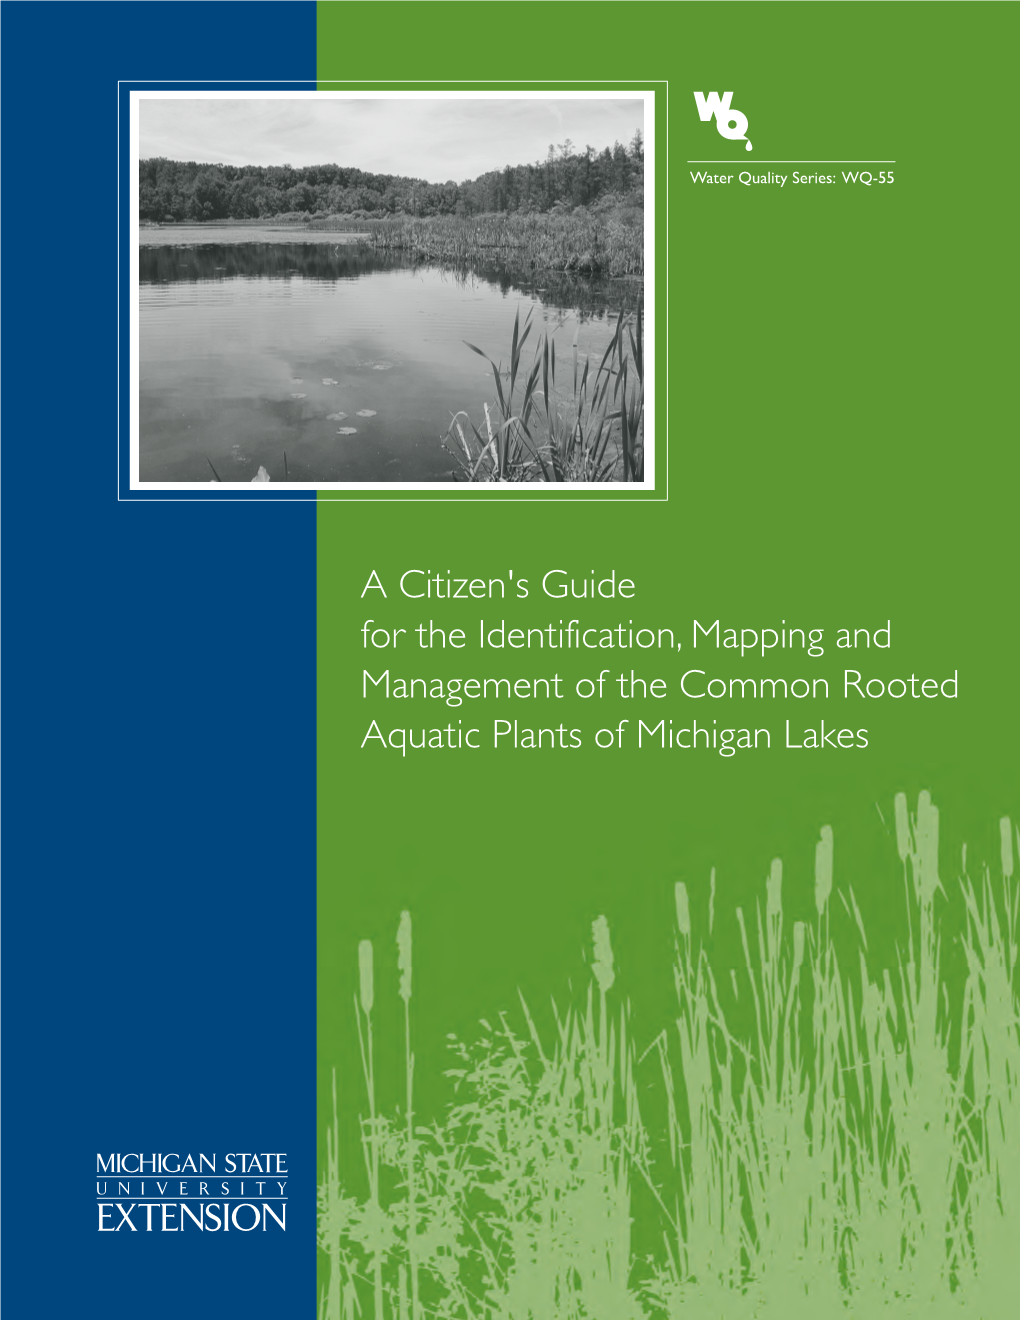 A Citizen's Guide for the Identification, Mapping and Management of the Common Rooted Aquatic Plants of Michigan Lakes